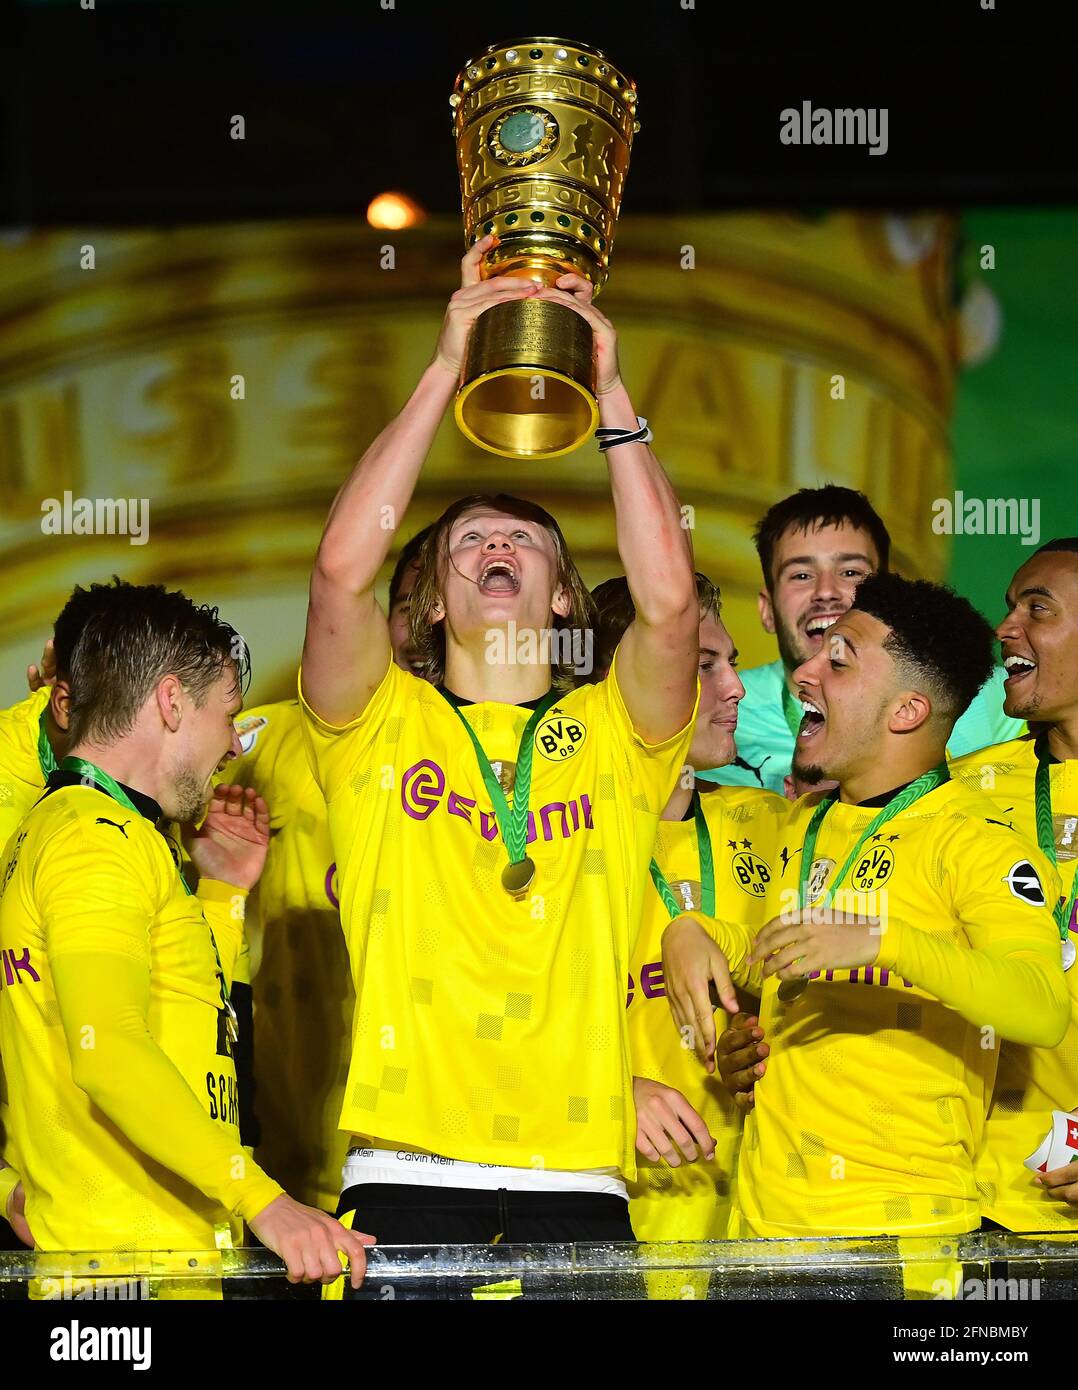 Erling HAALAND (DO) with cup, trophy, award ceremony. jubilation, joy,  enthusiasm team photo, team, team, team photo. 78th DFB Cup Final, RB  Leipzig (L) - Borussia Dortmund (DO) 1-4, in the Olympic